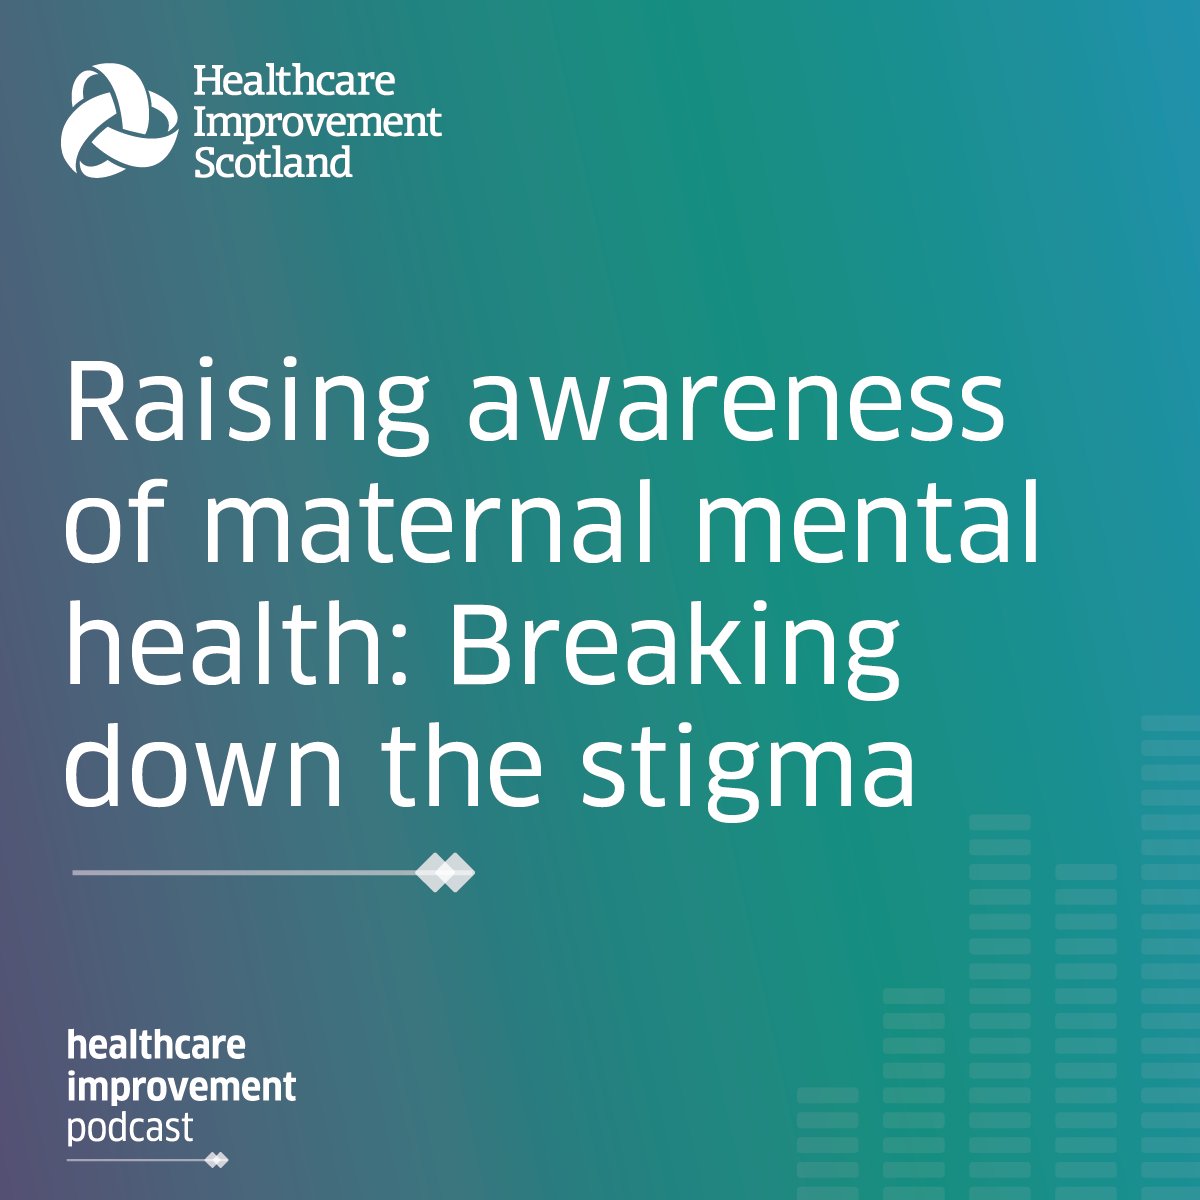 It’s #MaternalMentalHealthAwarenessWeek and we are currently working on a podcast that looks at this important issue. Sign up to be the first to know when the new episode is published or listen to other topics in our previous episodes. Link is in the comments. #MMHAW24